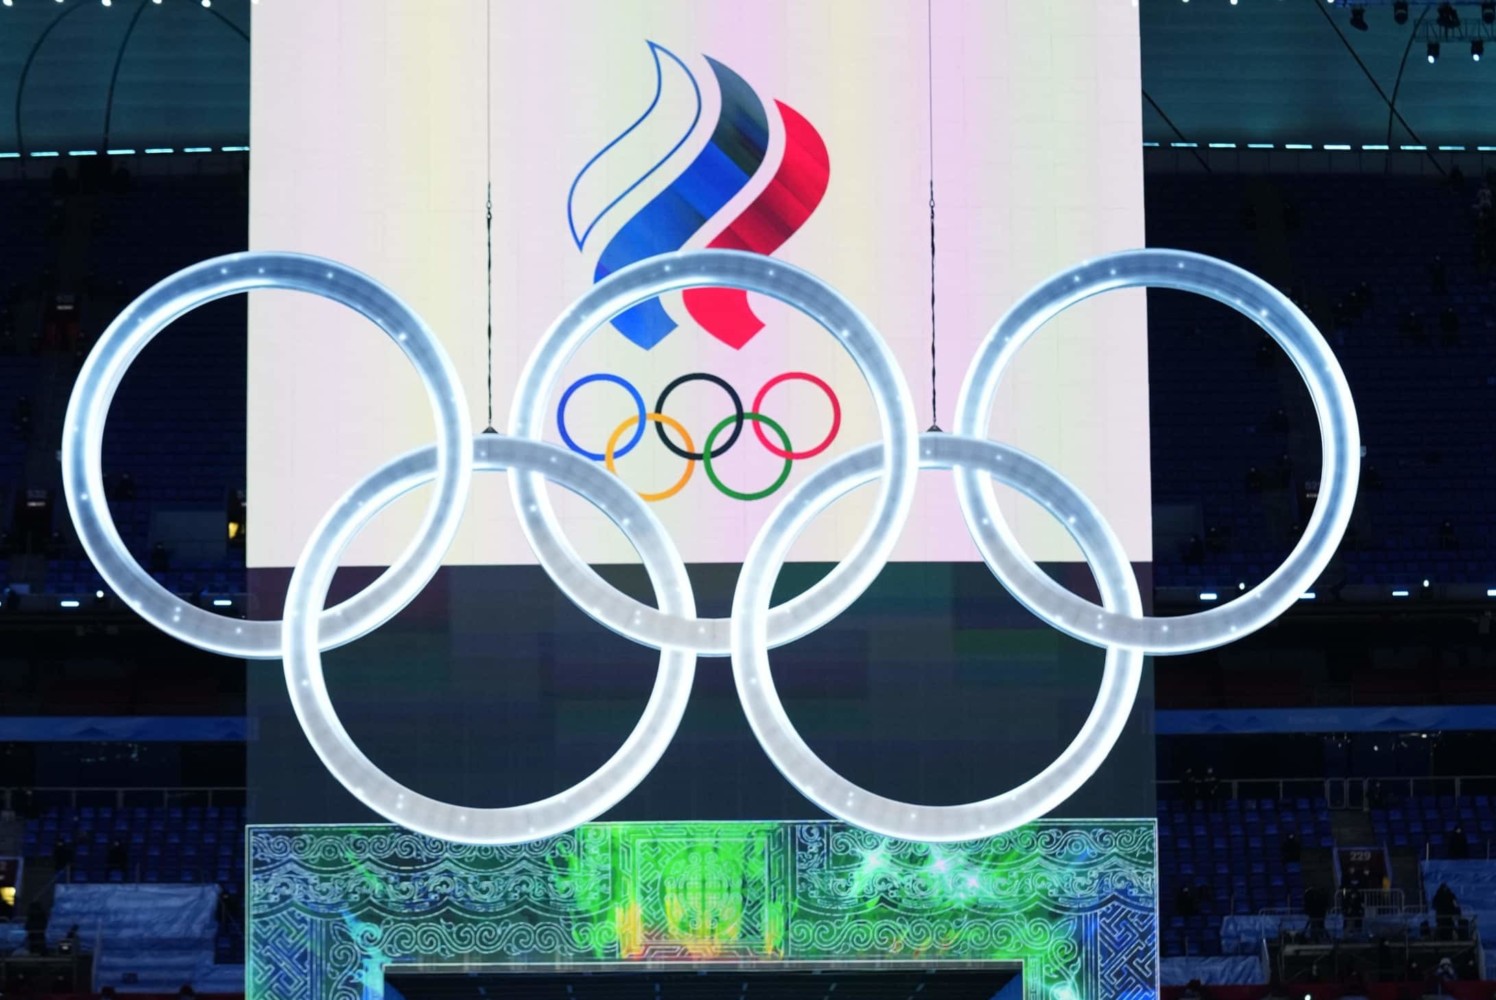 Olympics rings in front of large screen